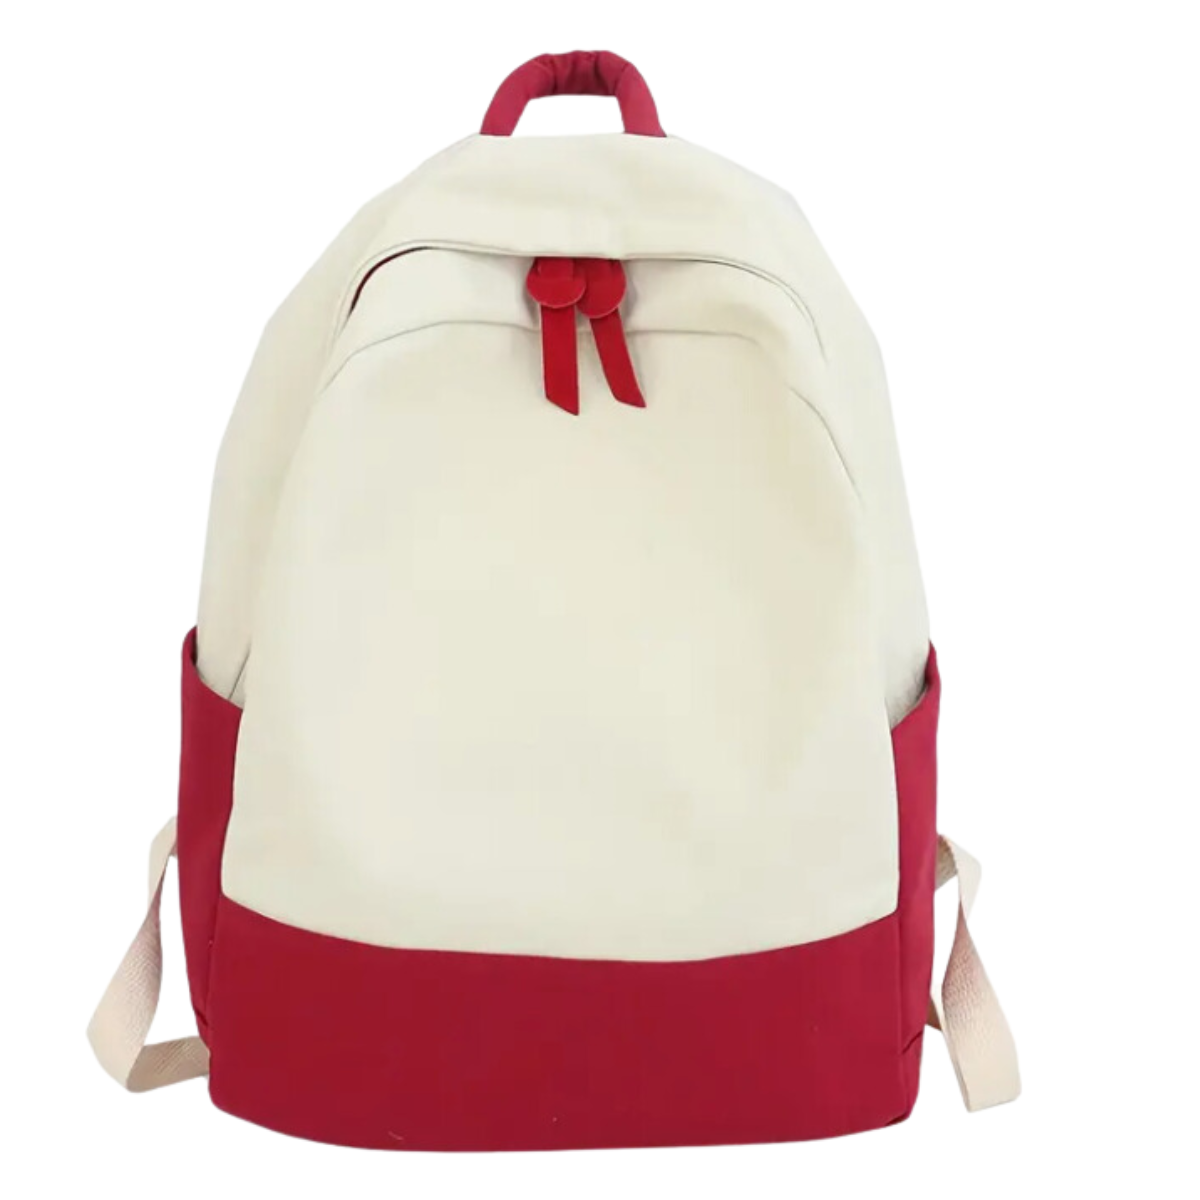 Child Backpack – The Little